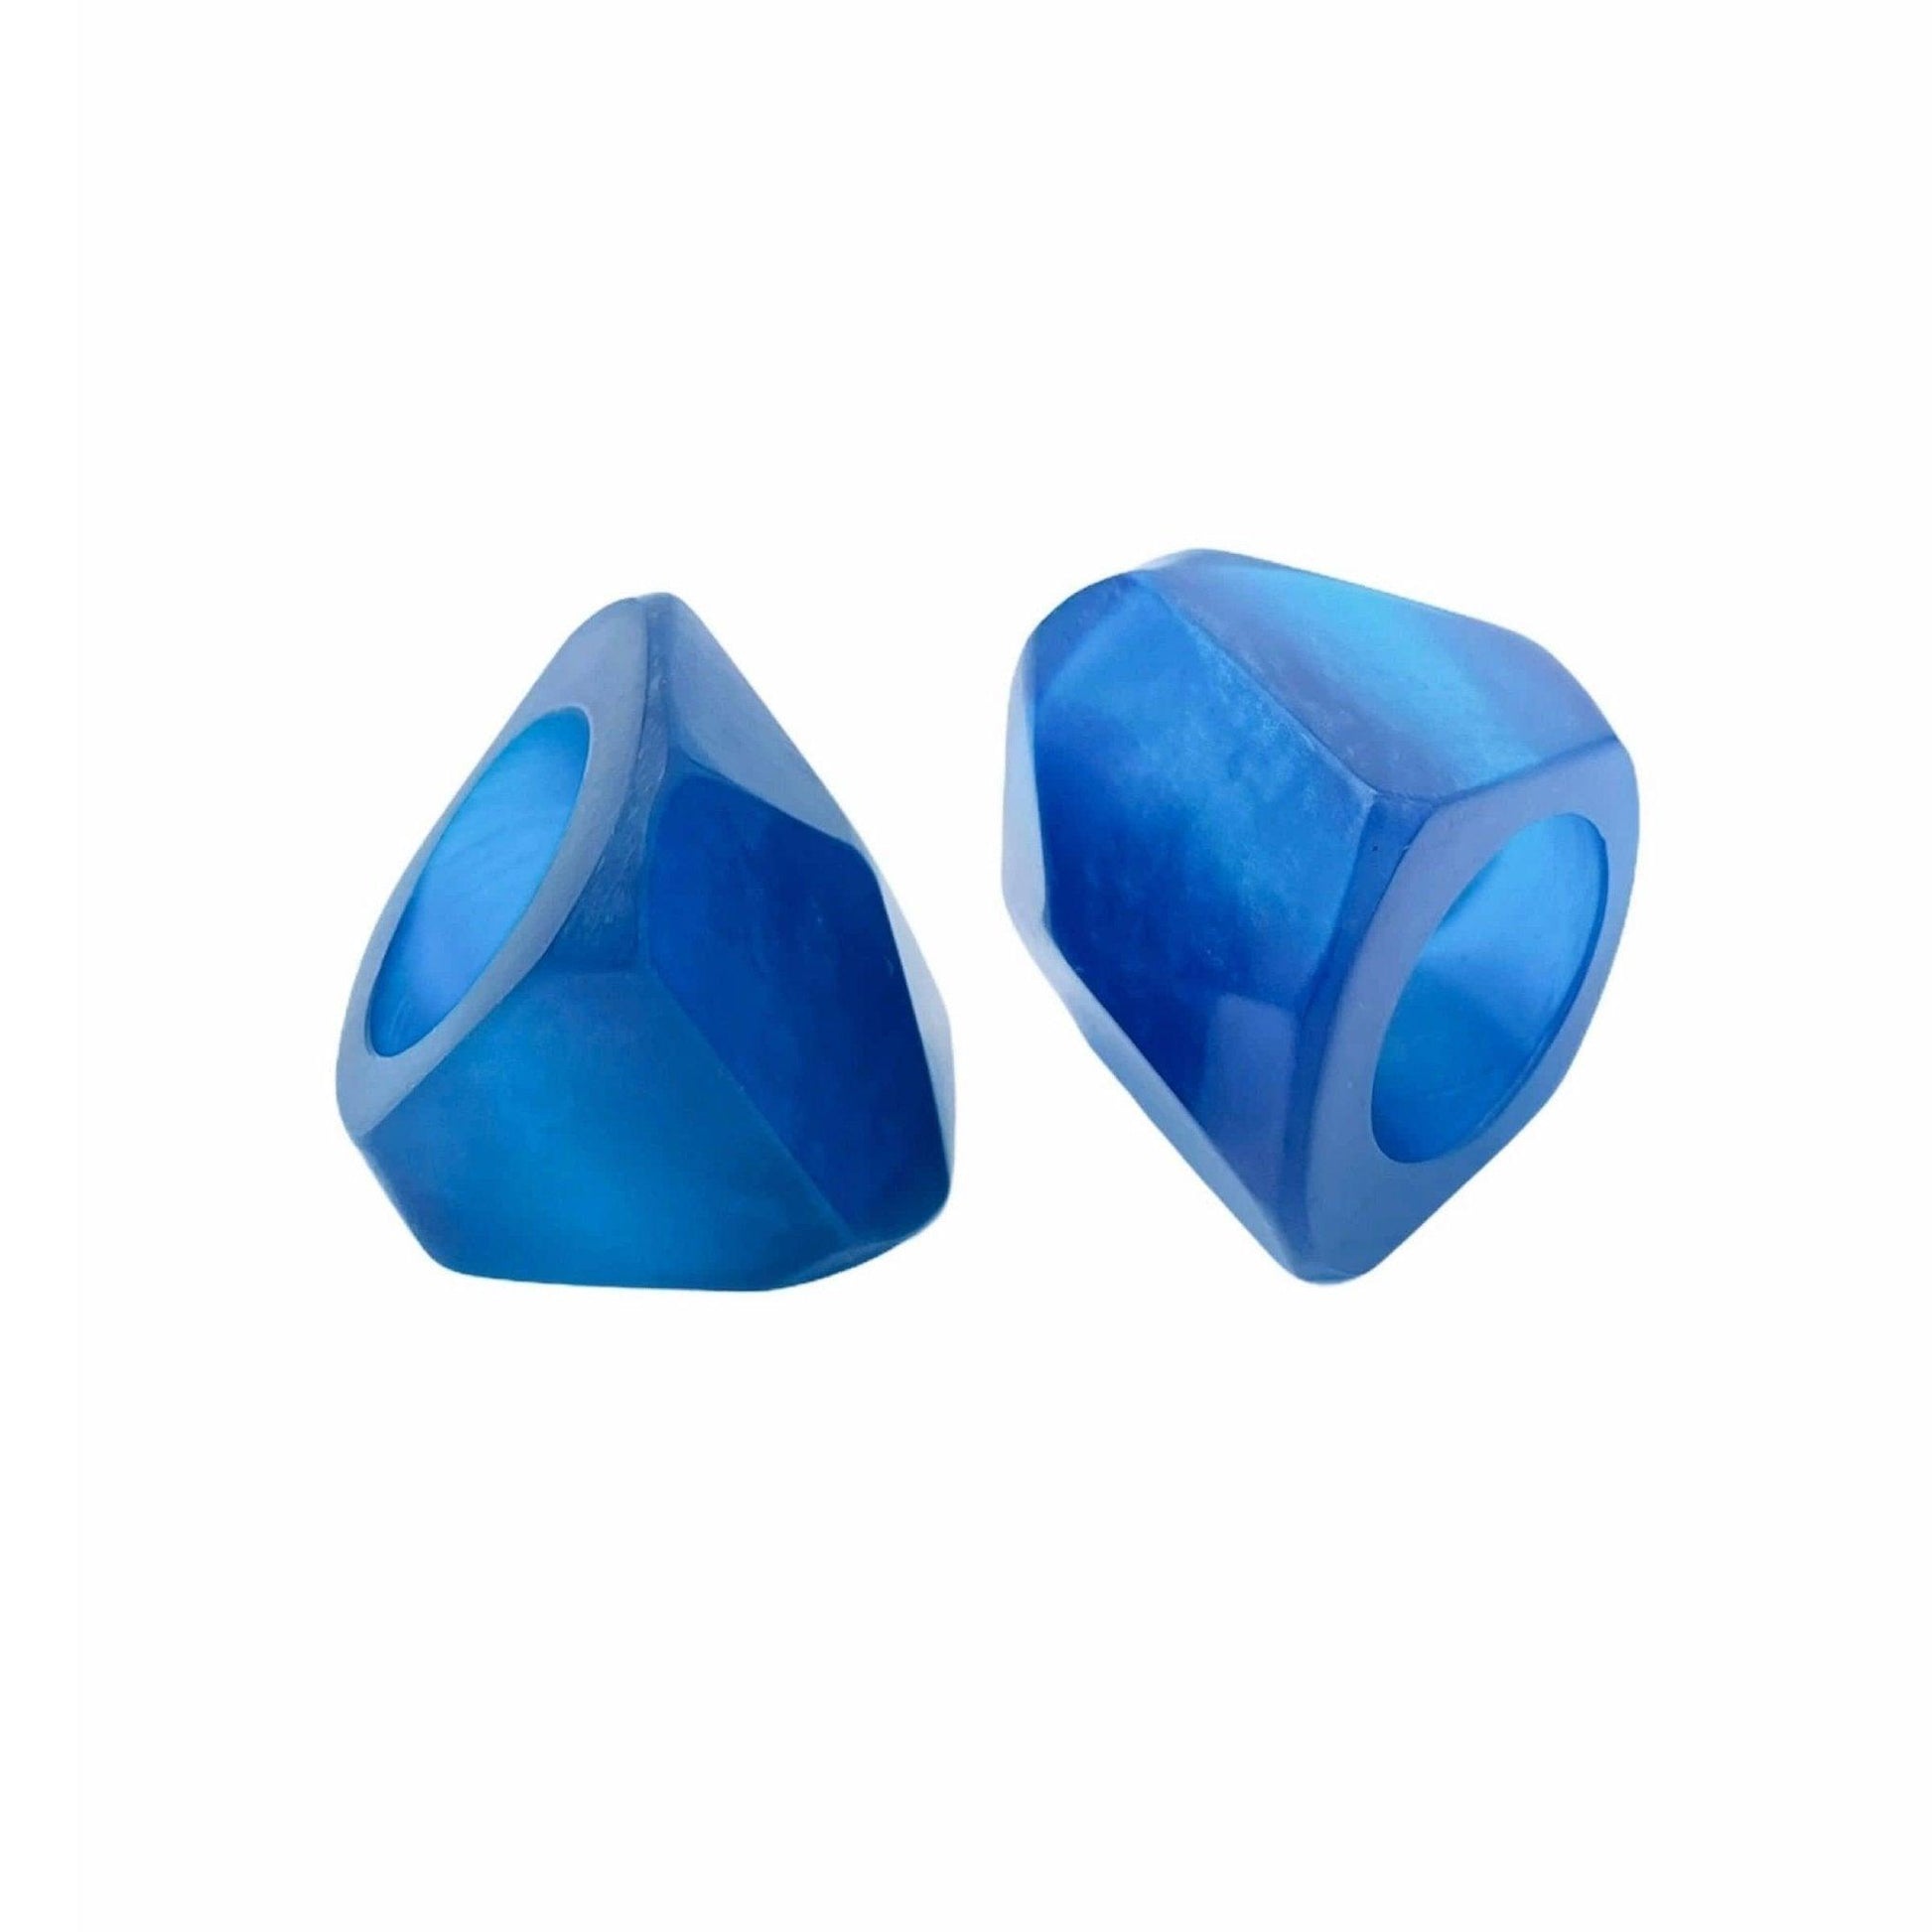 Blue Resin Square Pyramid Shape Modern Cocktail Ring